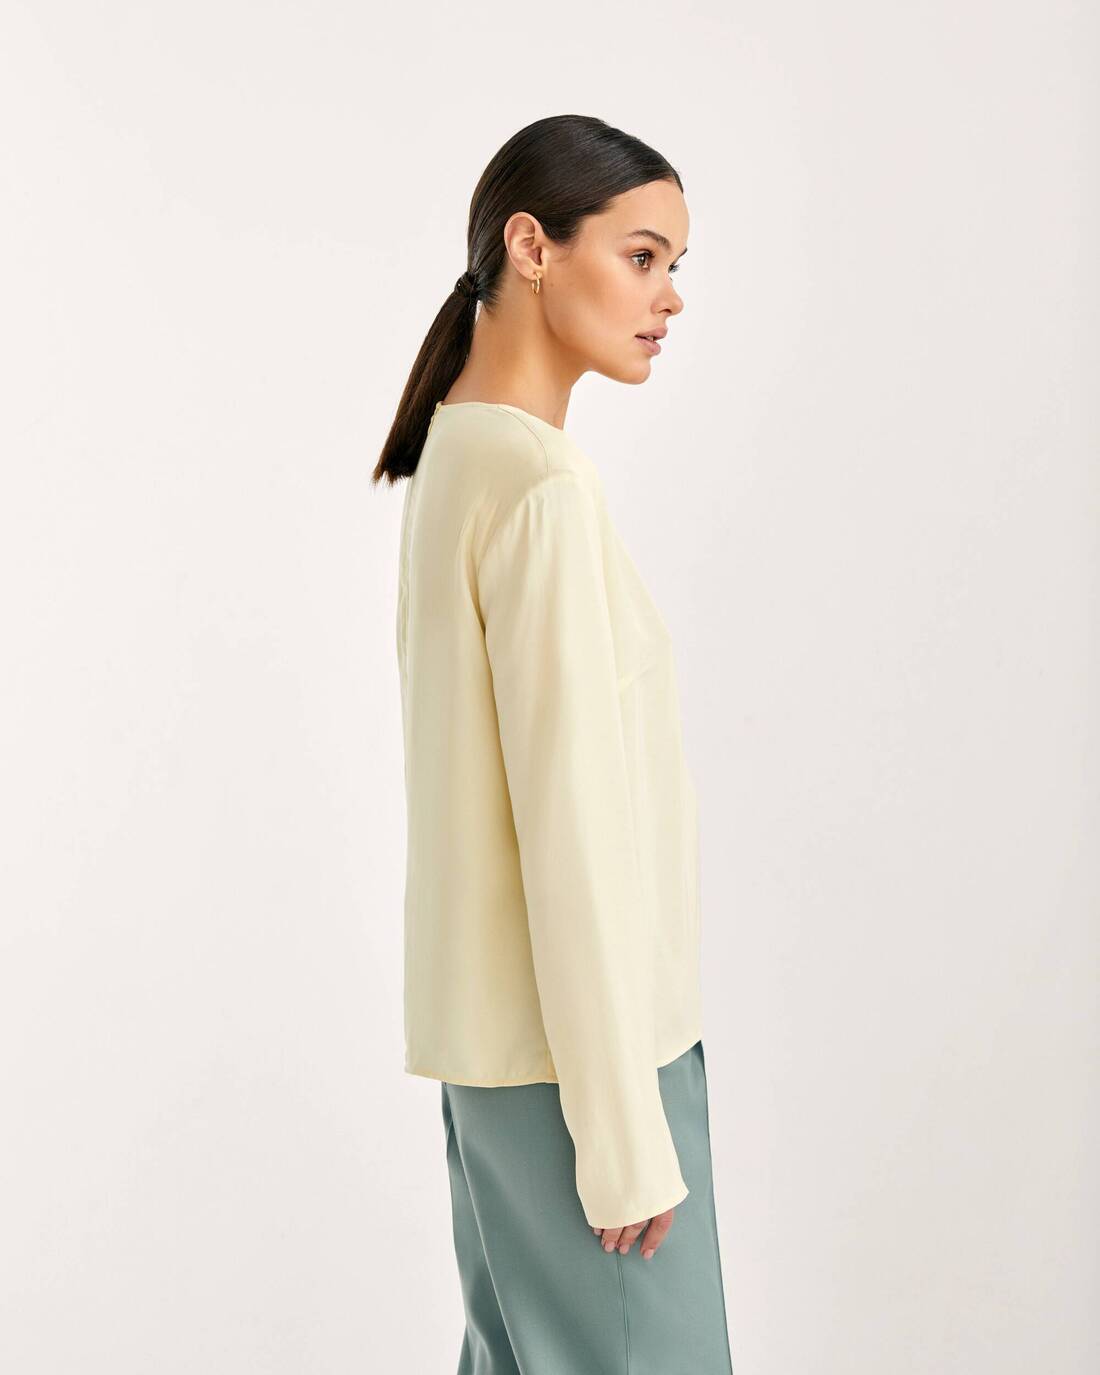 Satin top with shoulder pads